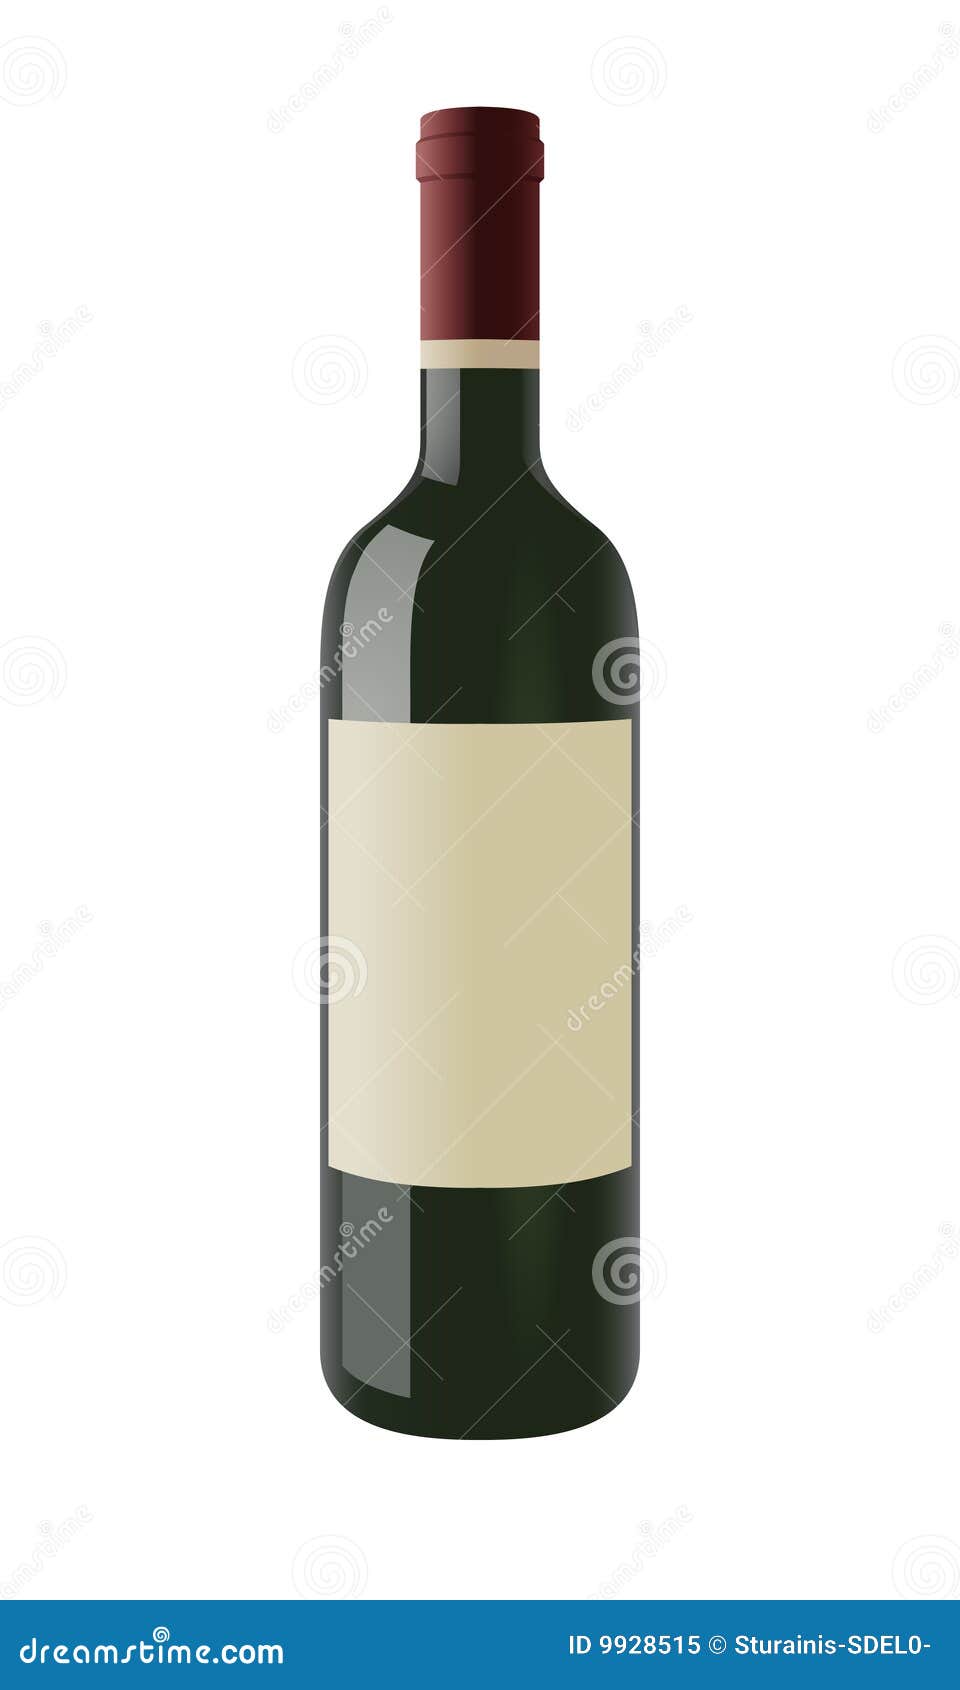 Royalty Free Stock Photo: Wine bottle with a blank label